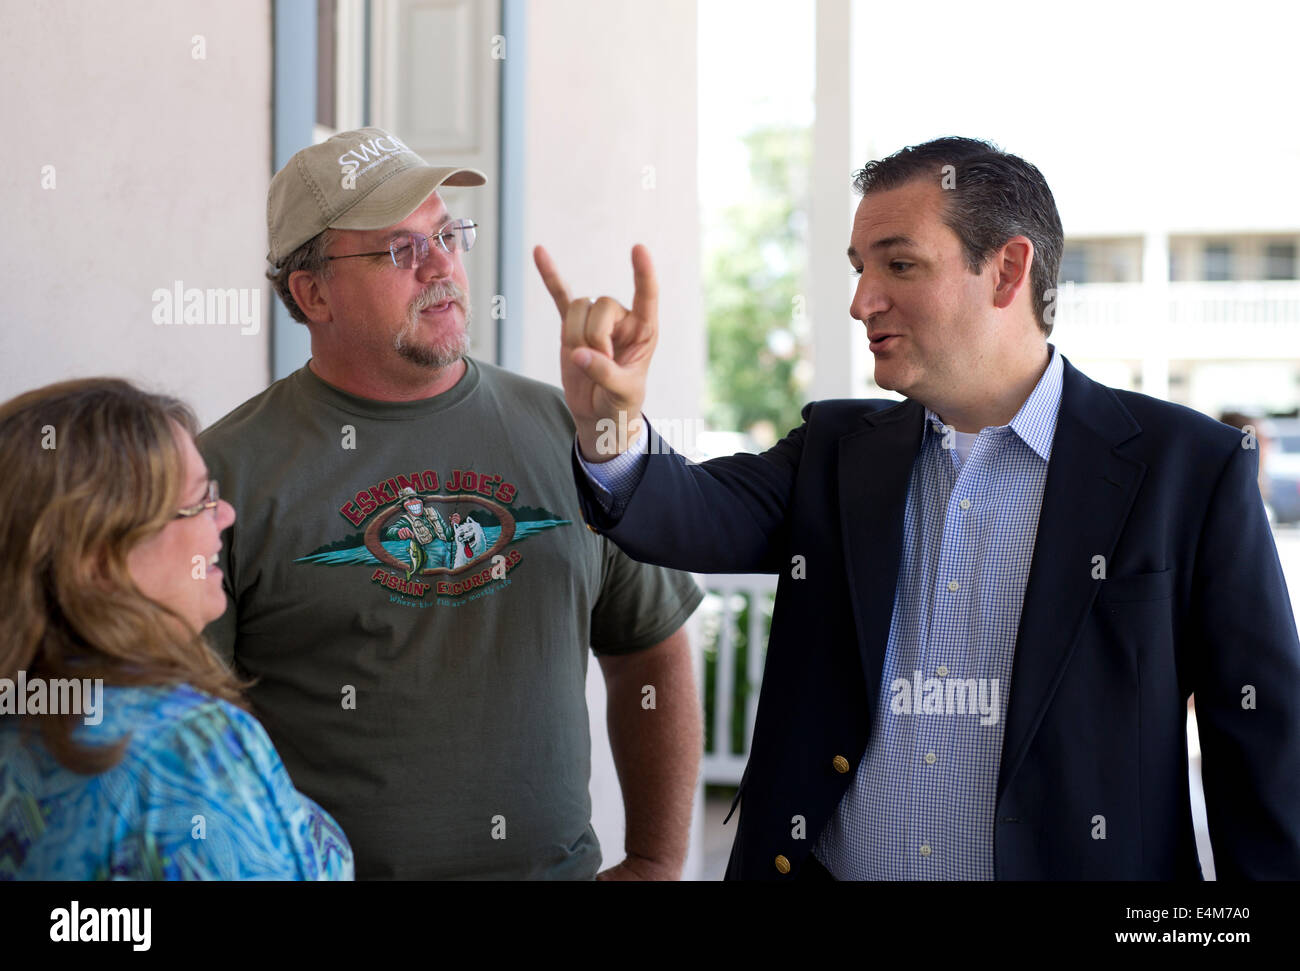 Republican U.S. Senator Ted Cruz flashes a 'Hook-em 'Horns' sign as he visits with constituents in downtown Fredericksburg Texas Stock Photo